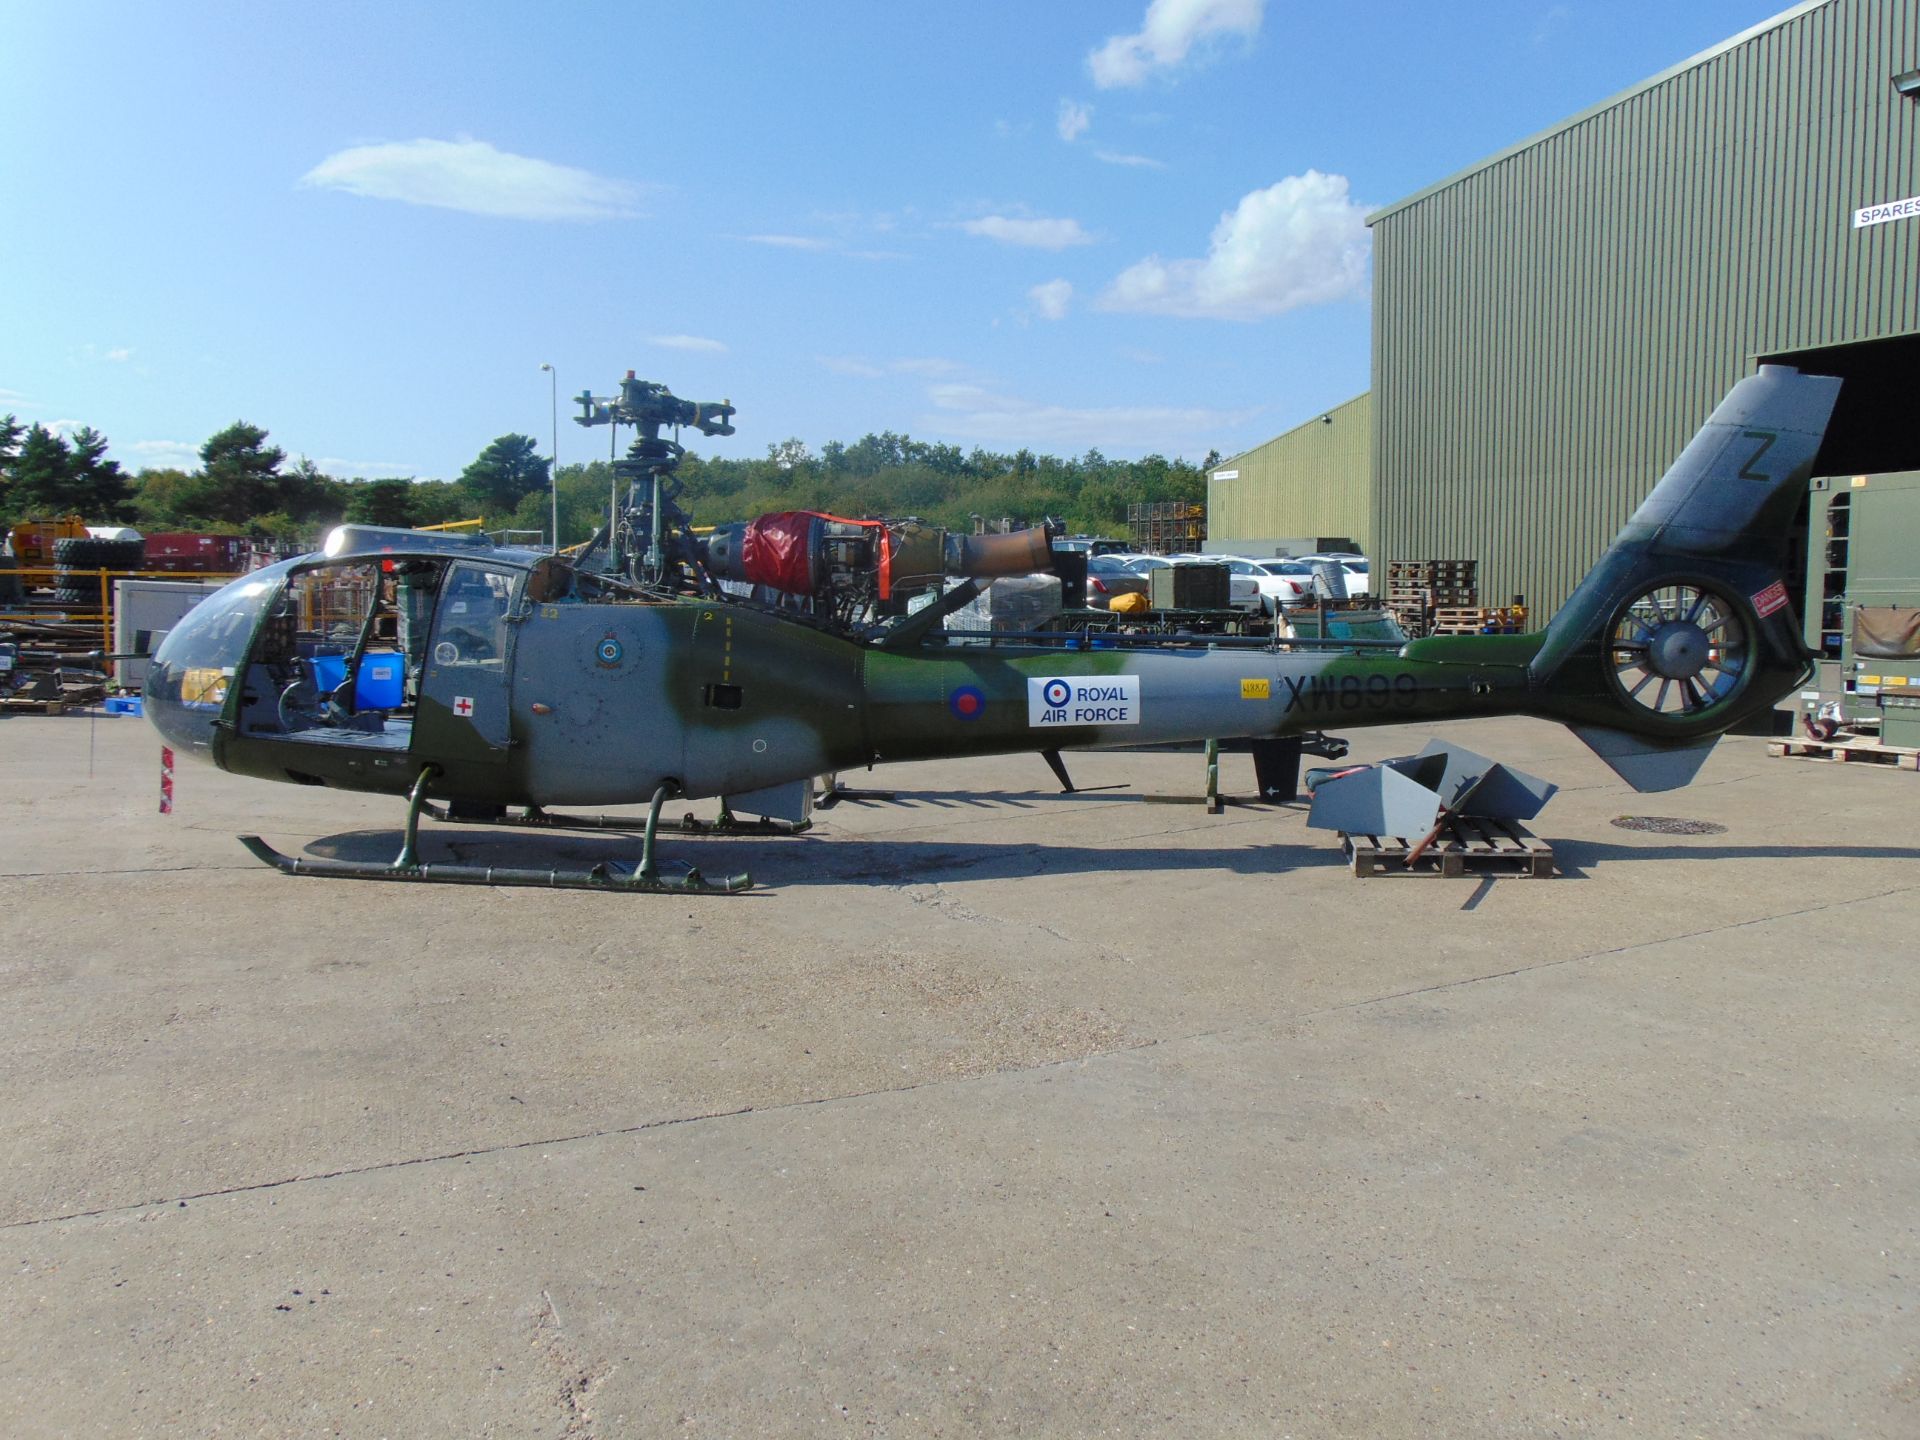 UK Ministry of Defence Training School Gazelle AH 1 Turbine Helicopter (TAIL NUMBER XW899) - Image 3 of 47